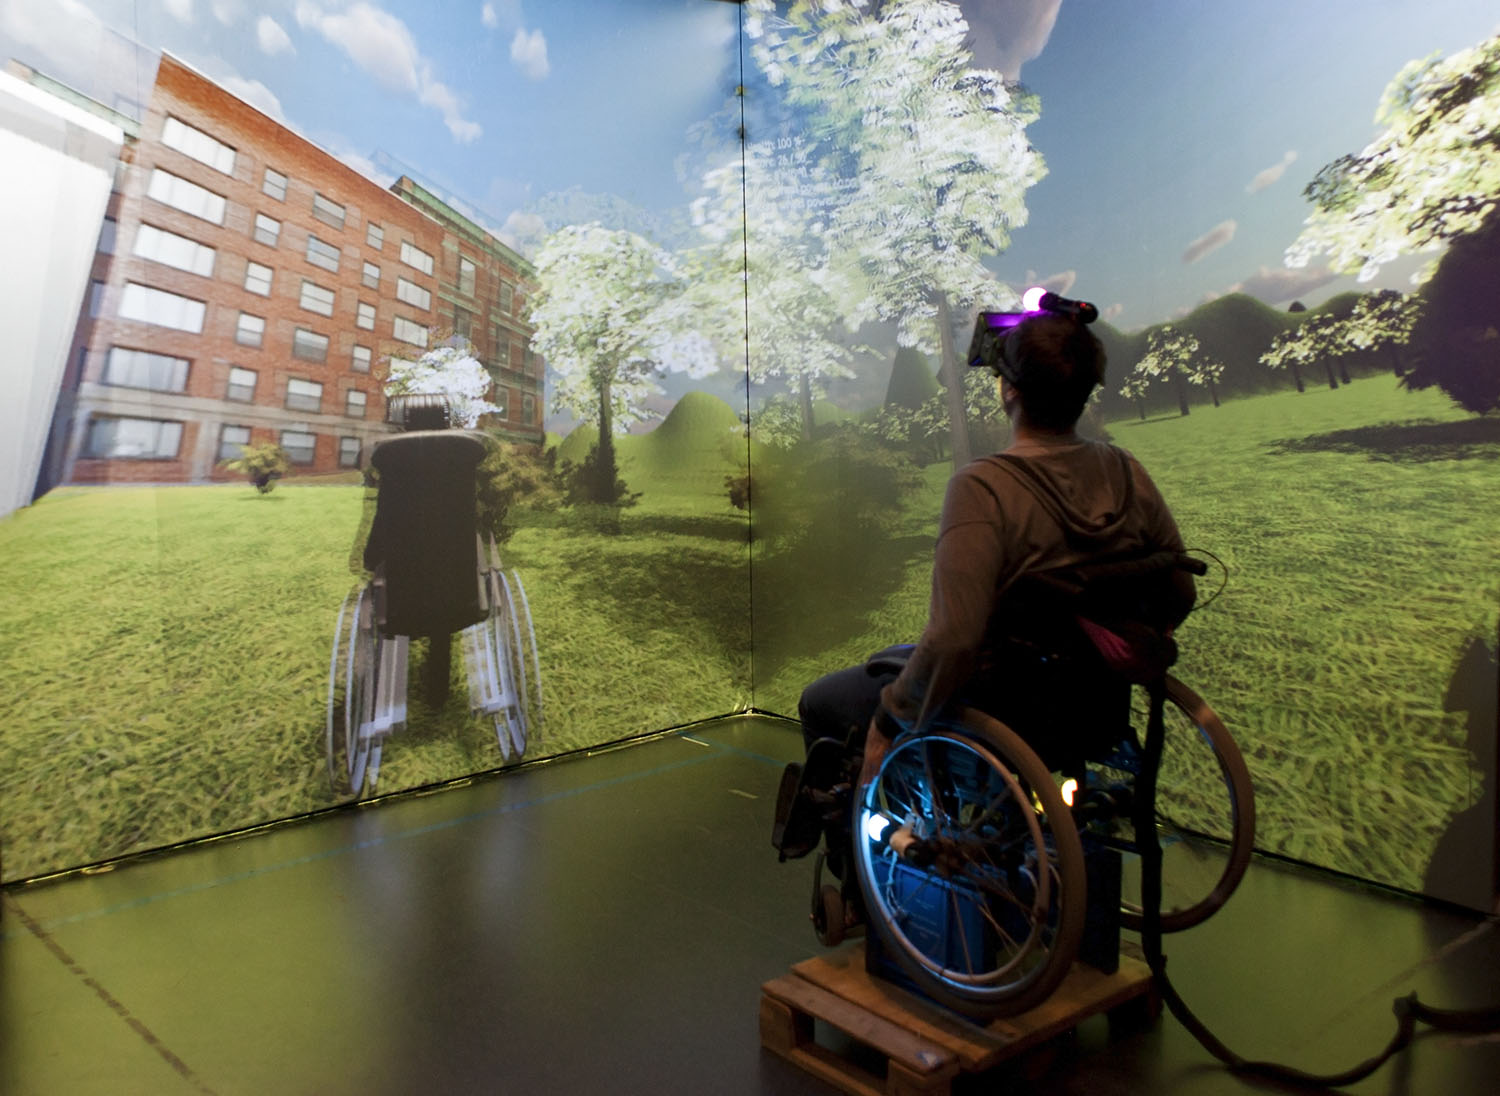 An empowering first-person game using Oculus Rift, where the player controls a wheelchair by spinning wheels that have PS Move controllers attached to them.